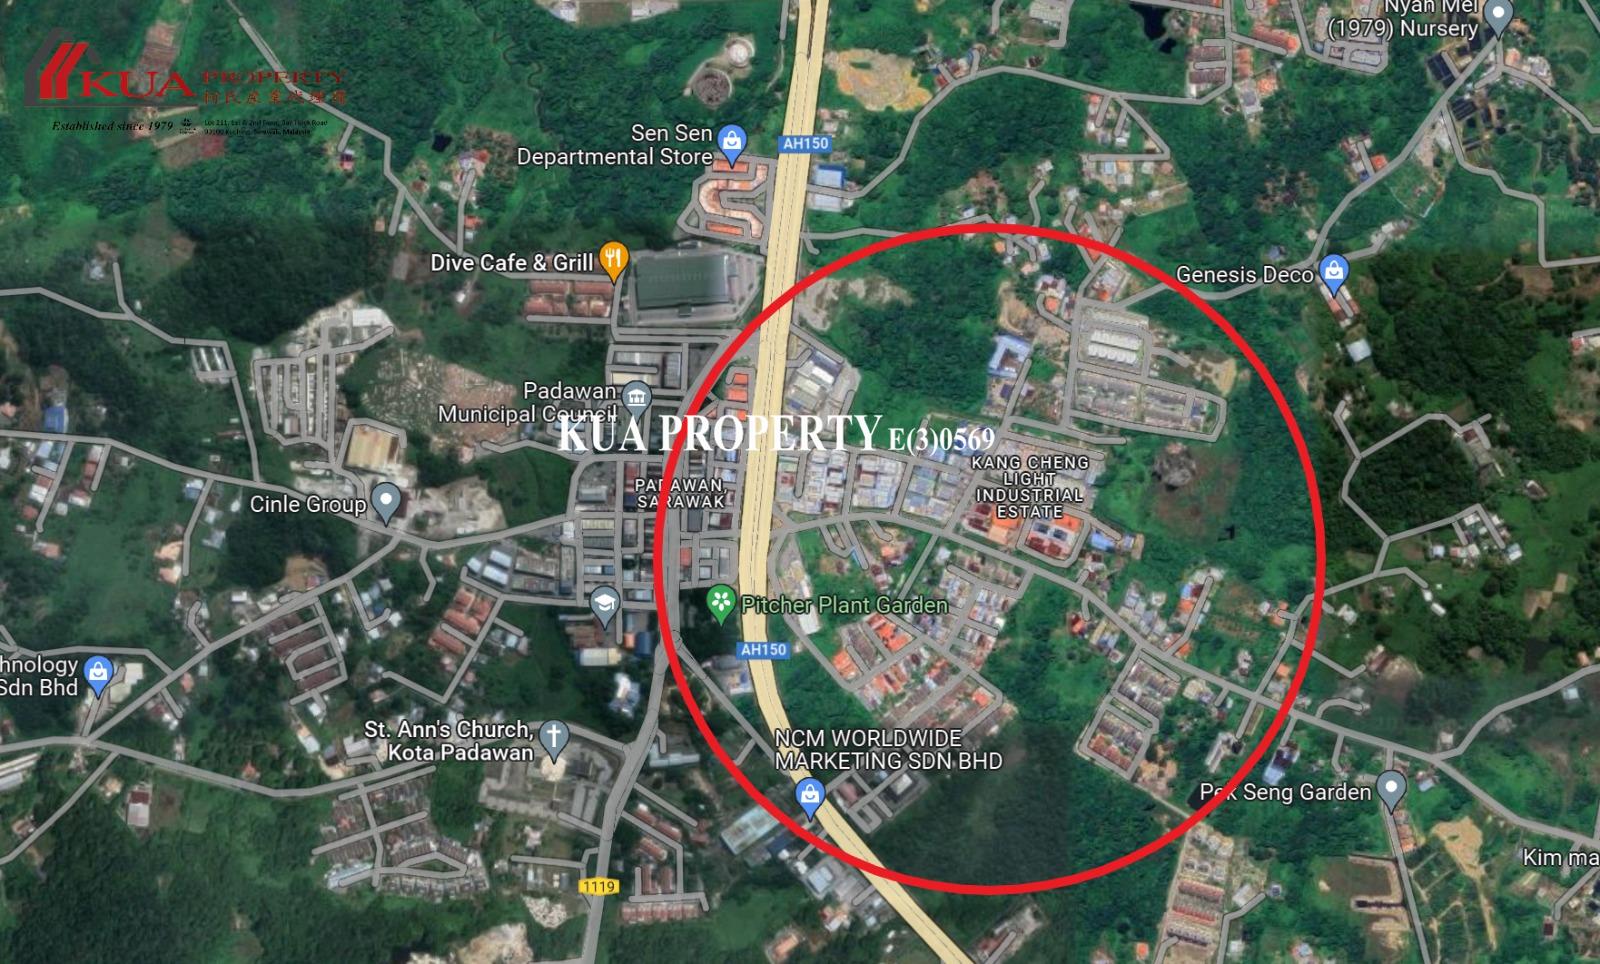 Agriculture Land For Sale! Located at 10th Mile, Jalan Kuap